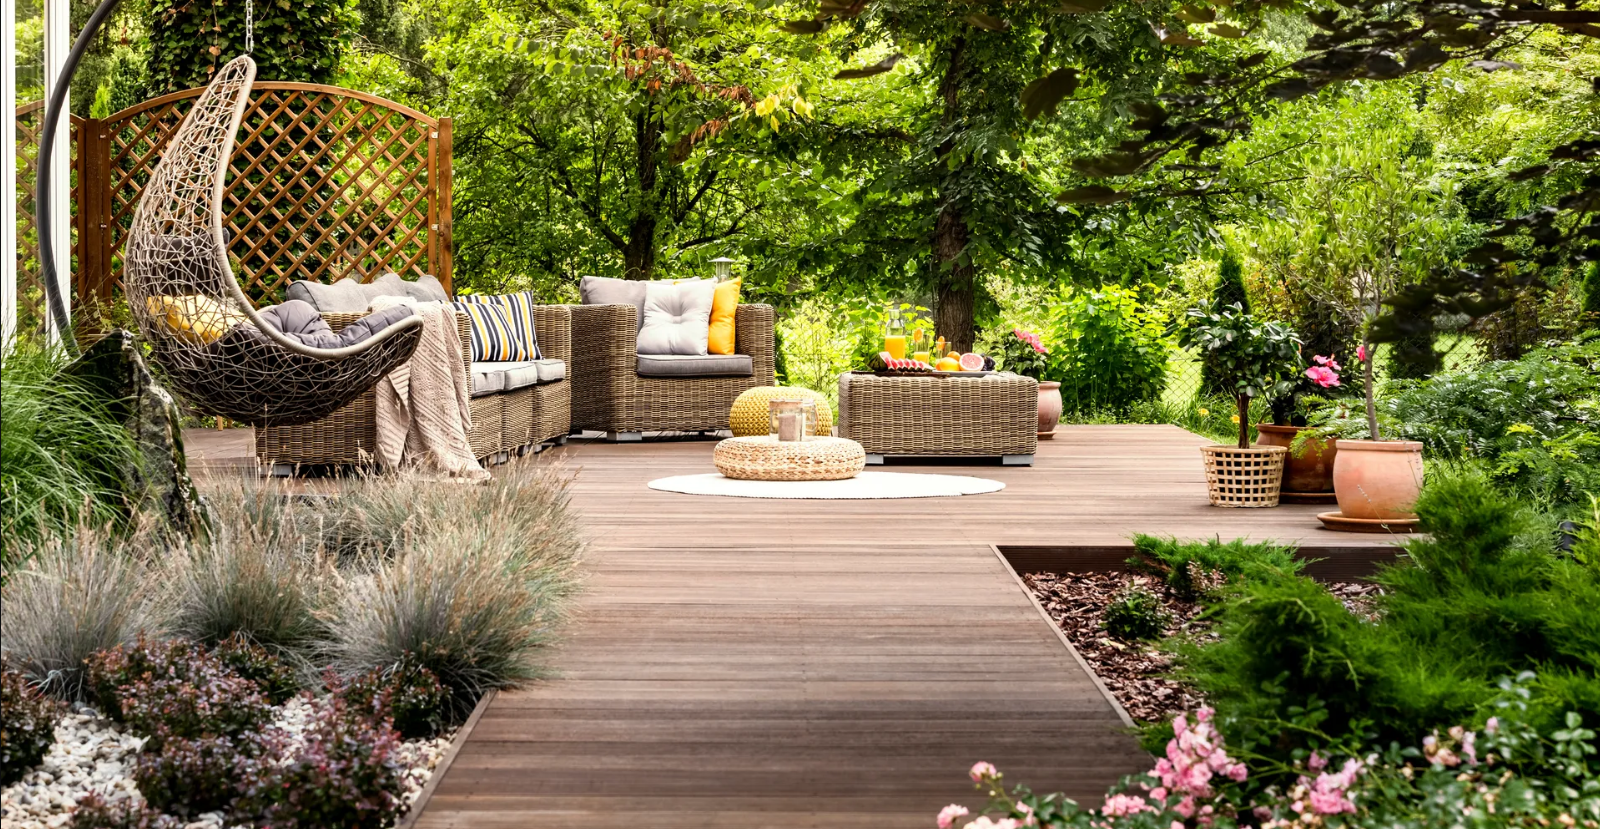 10 Creative Outdoor Garden Decoration Ideas to Spruce Up Your Space